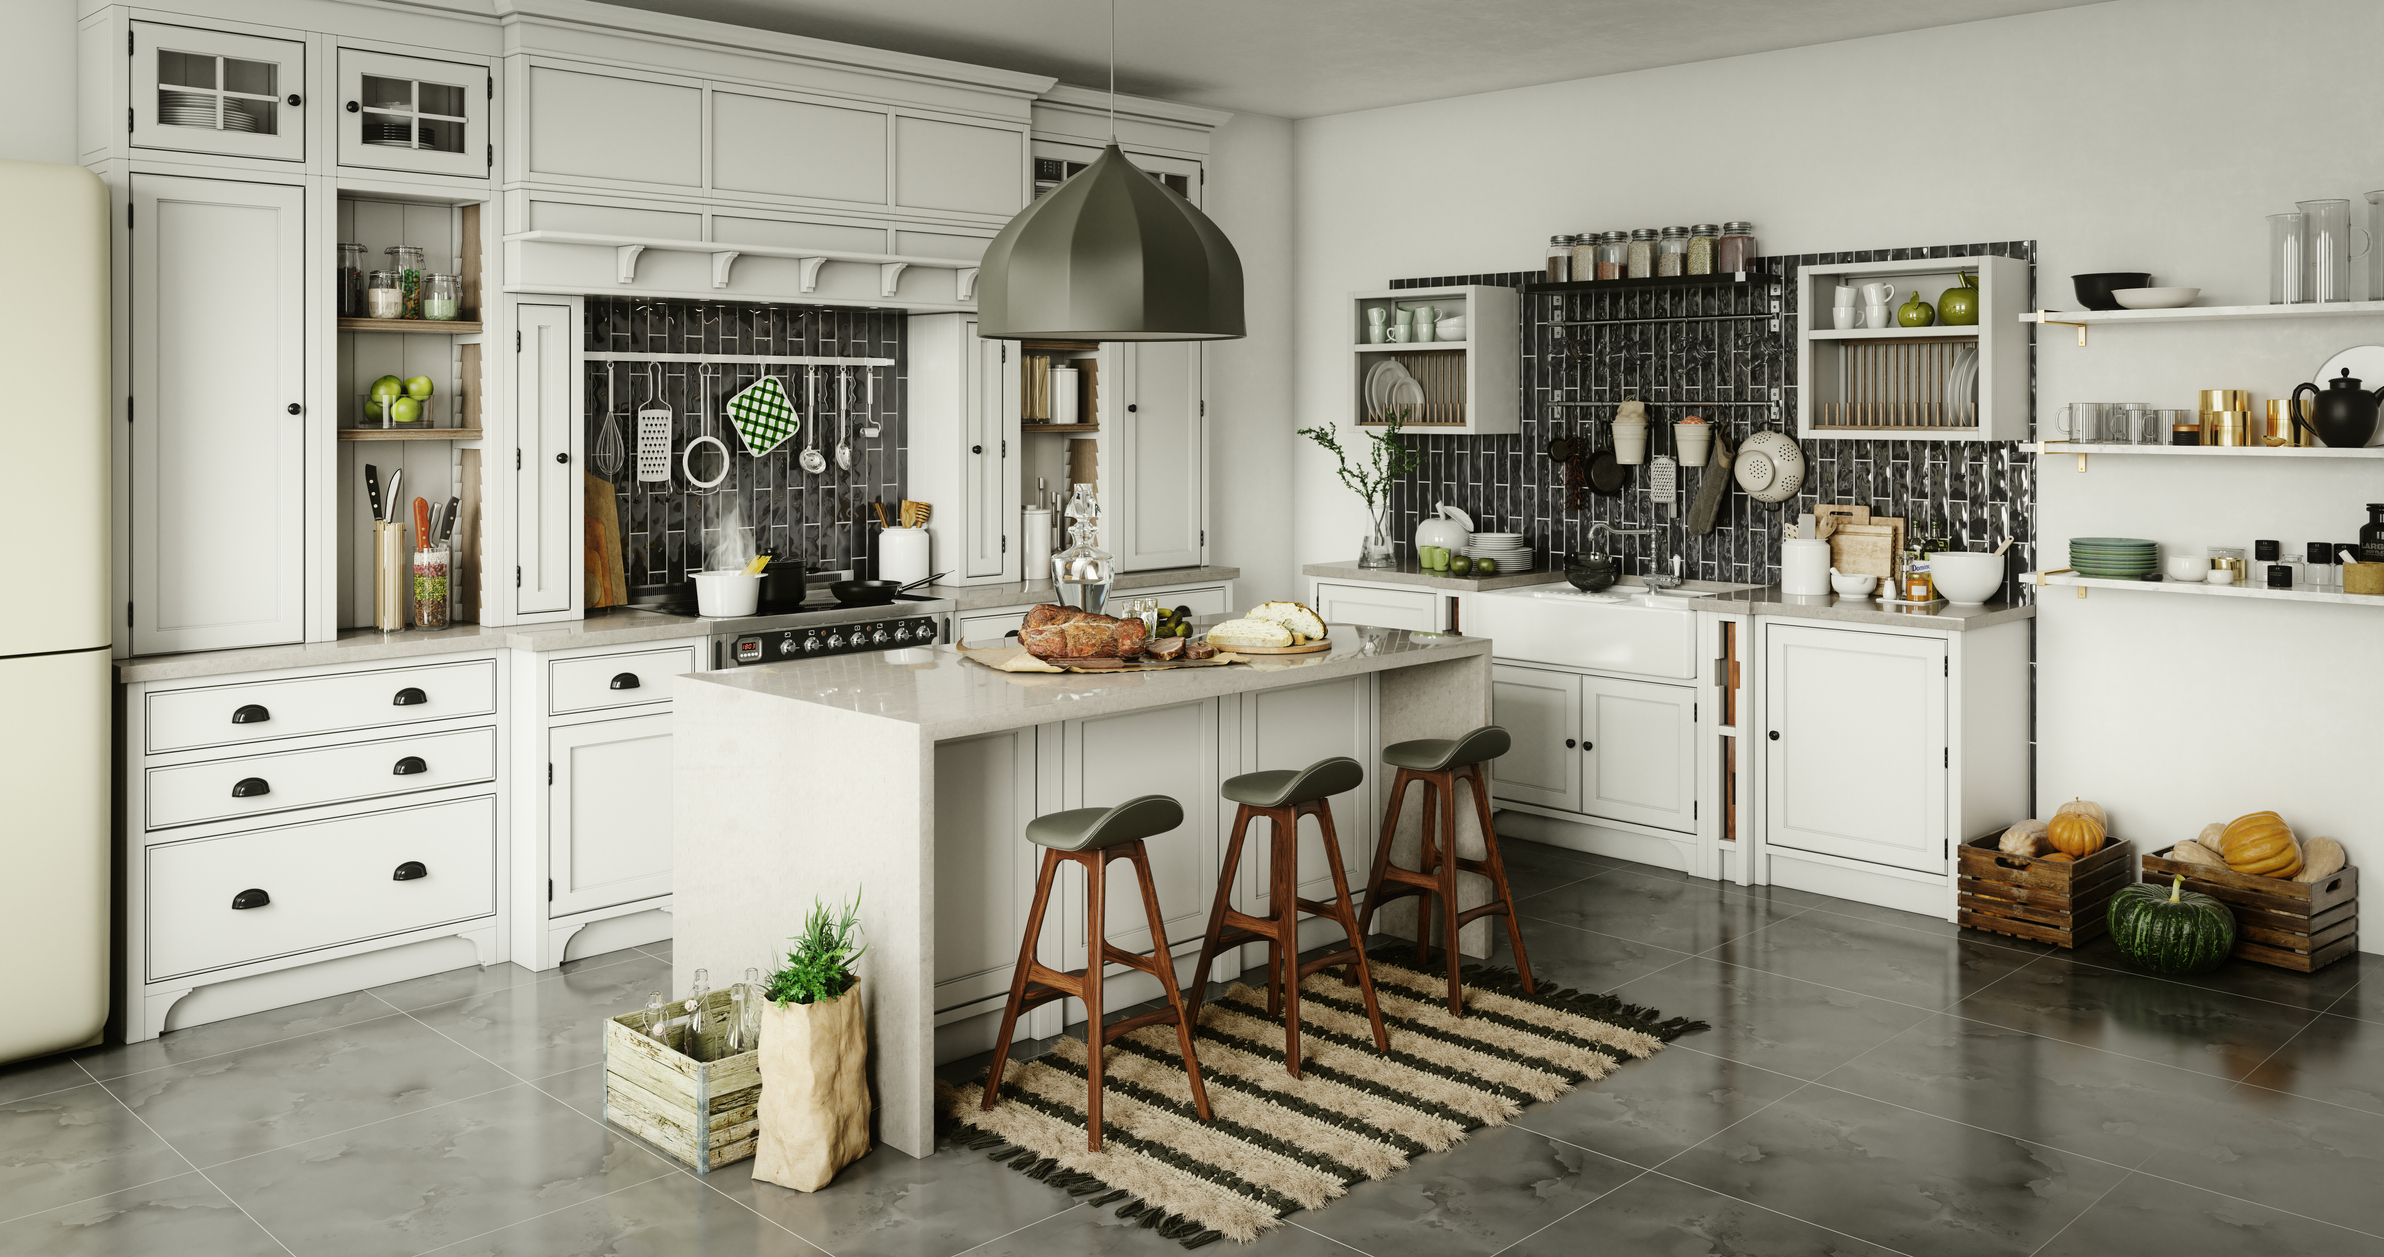 an example of kitchen remodeling in the south hills